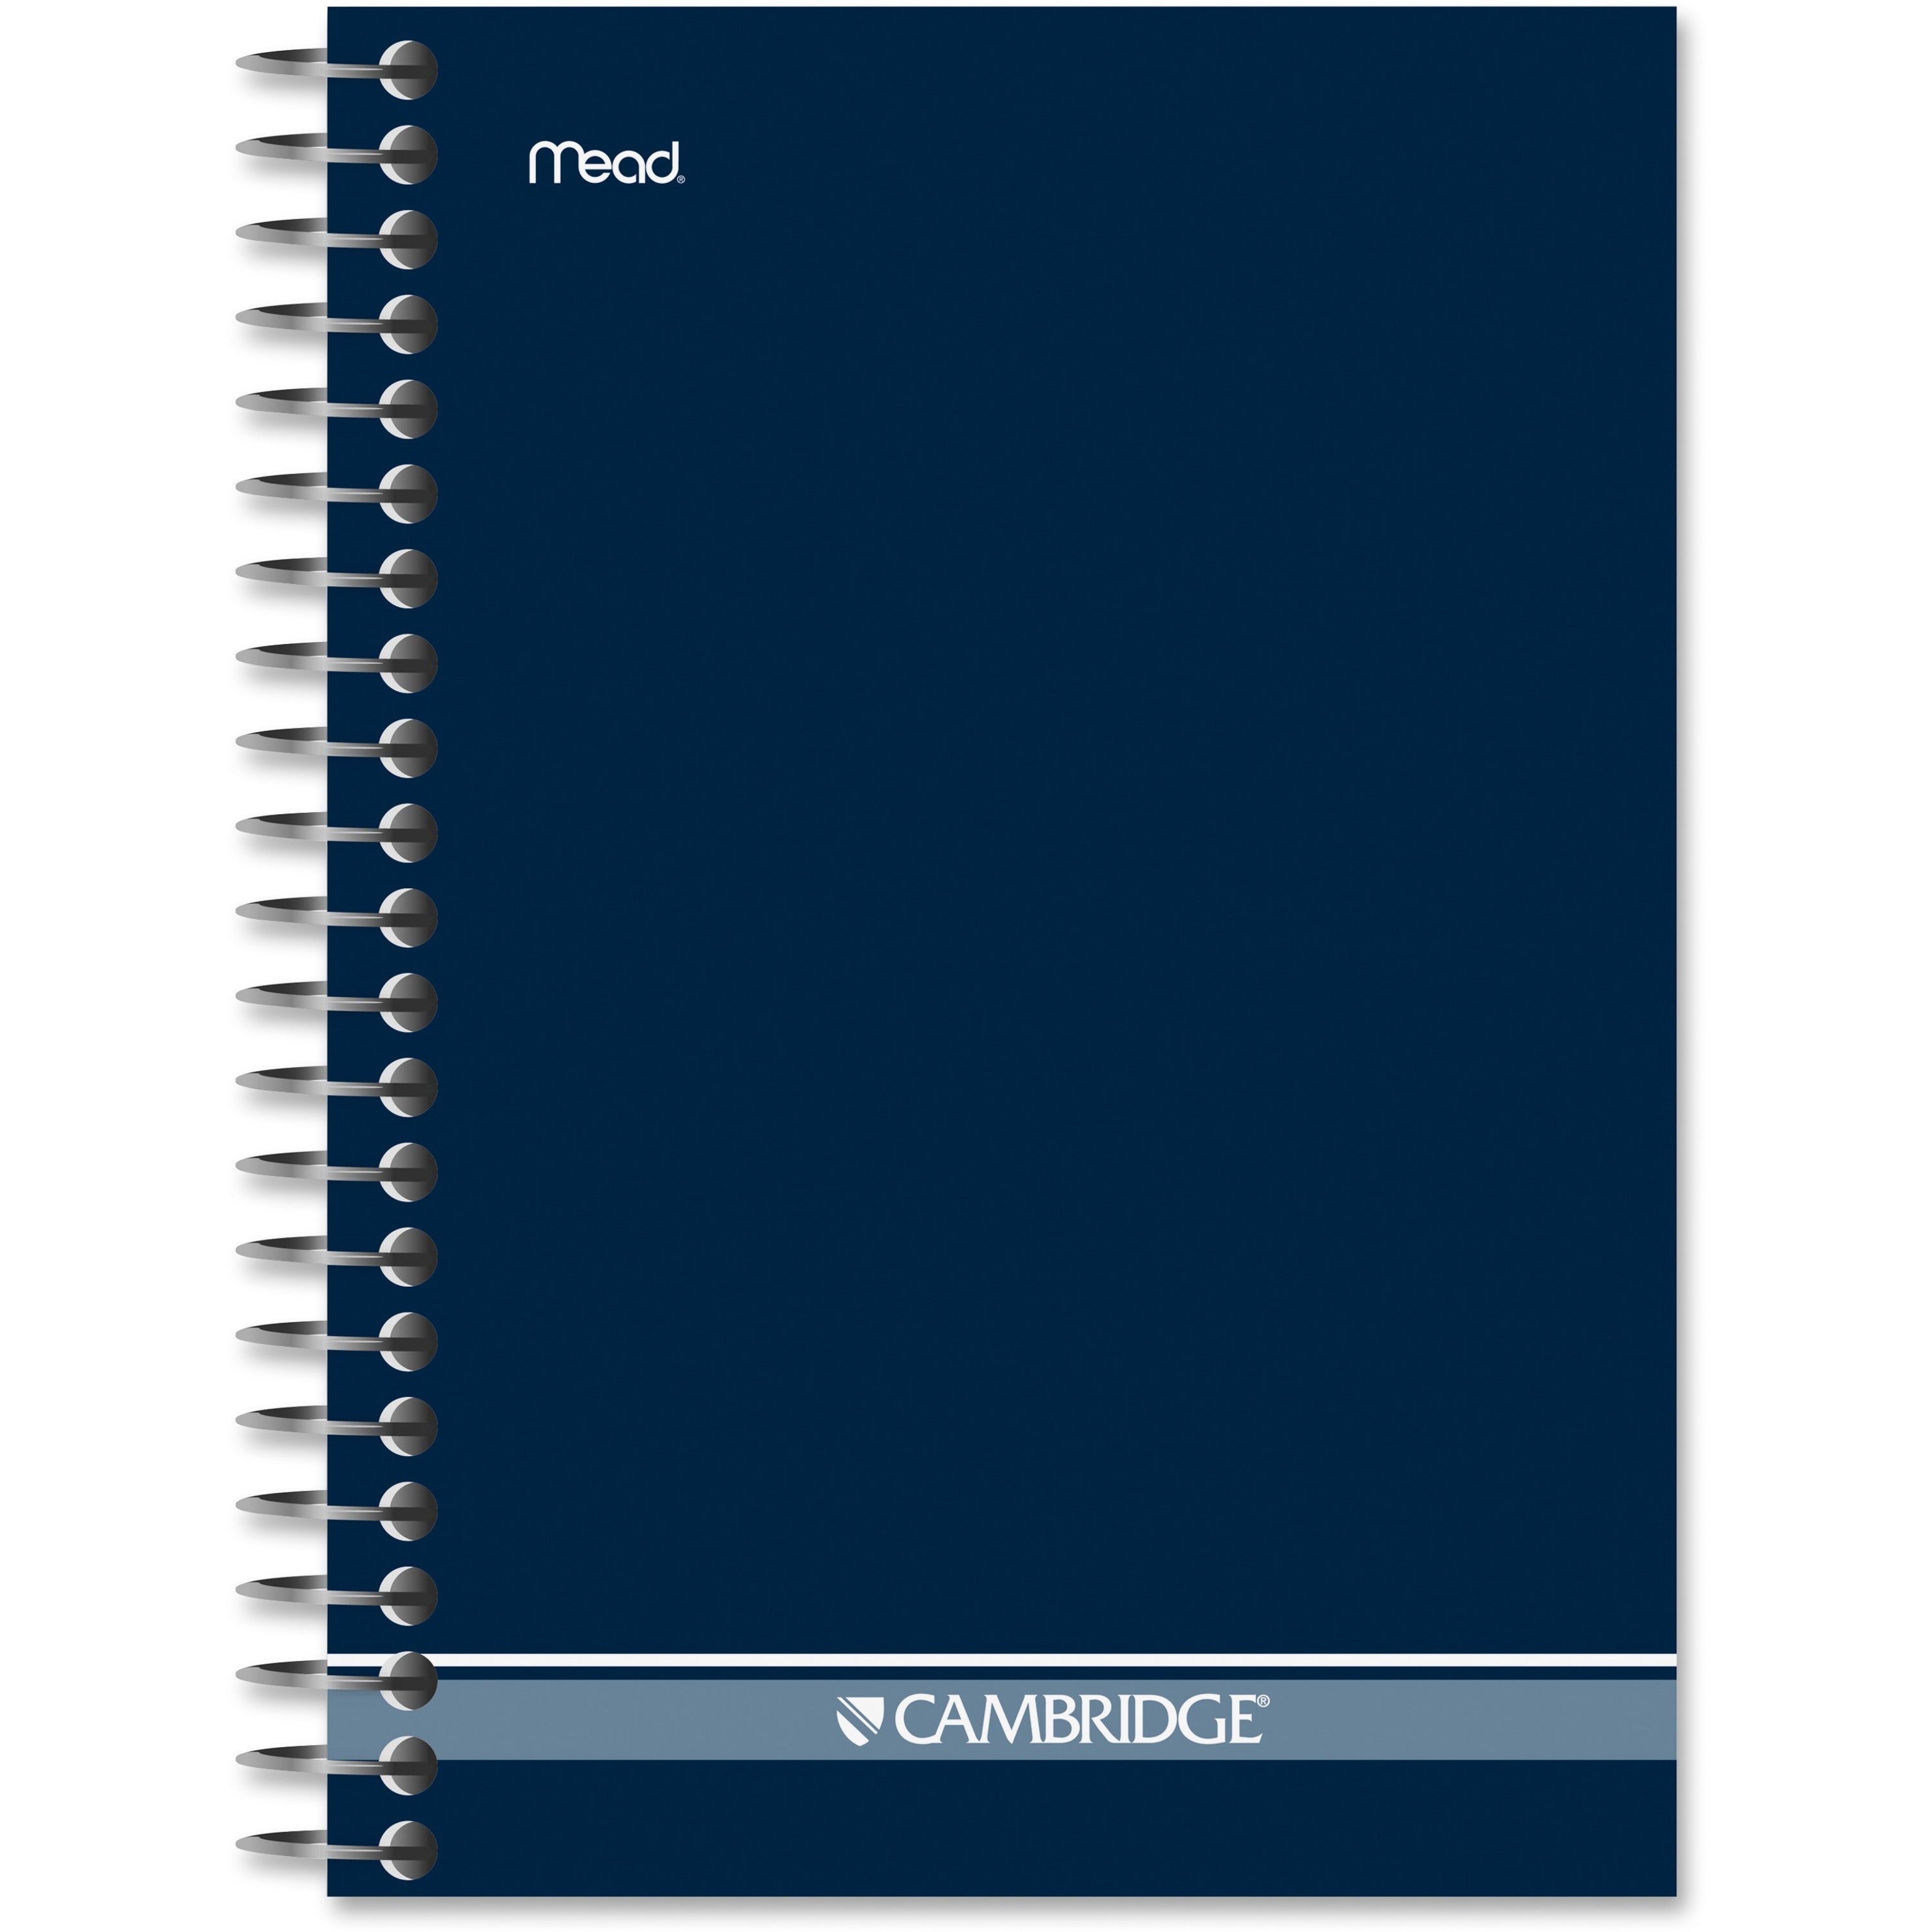 Mead Fashion Wire Bound Notebook - 140 Sheets - Wire Bound - 0.28" Ruled - 5" x 7" - White Paper - NavyCardboard Cover - Pocket, Perforated - 1 Each - 